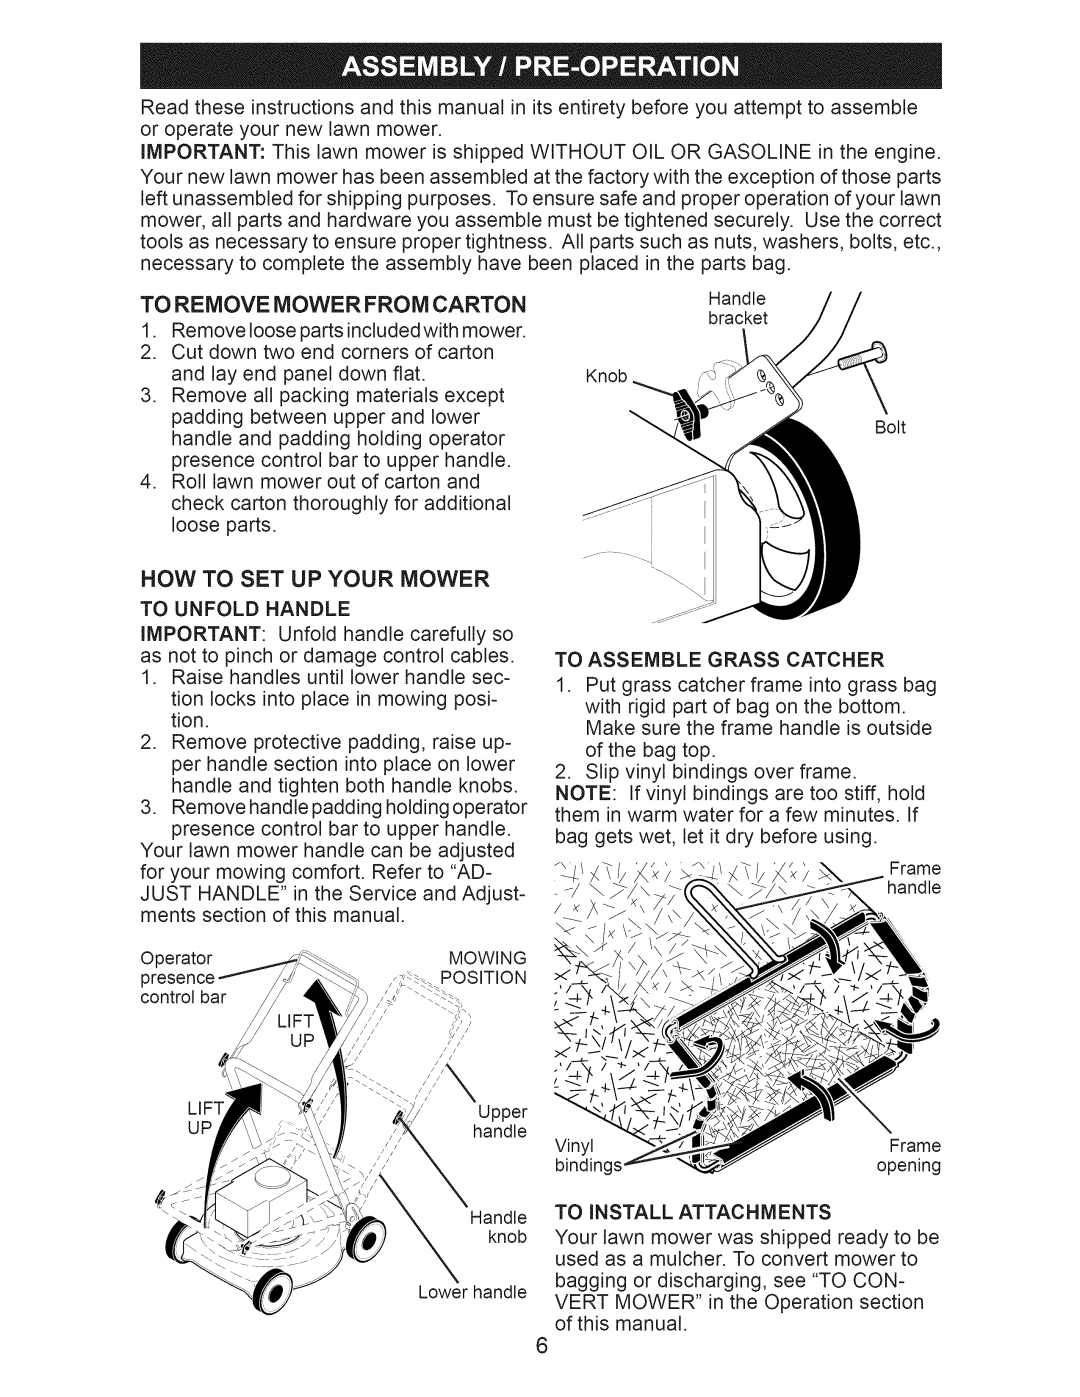 Craftsman 917.374358 owner manual To Remove Mower From Carton, Now To Set Up Your Mower 